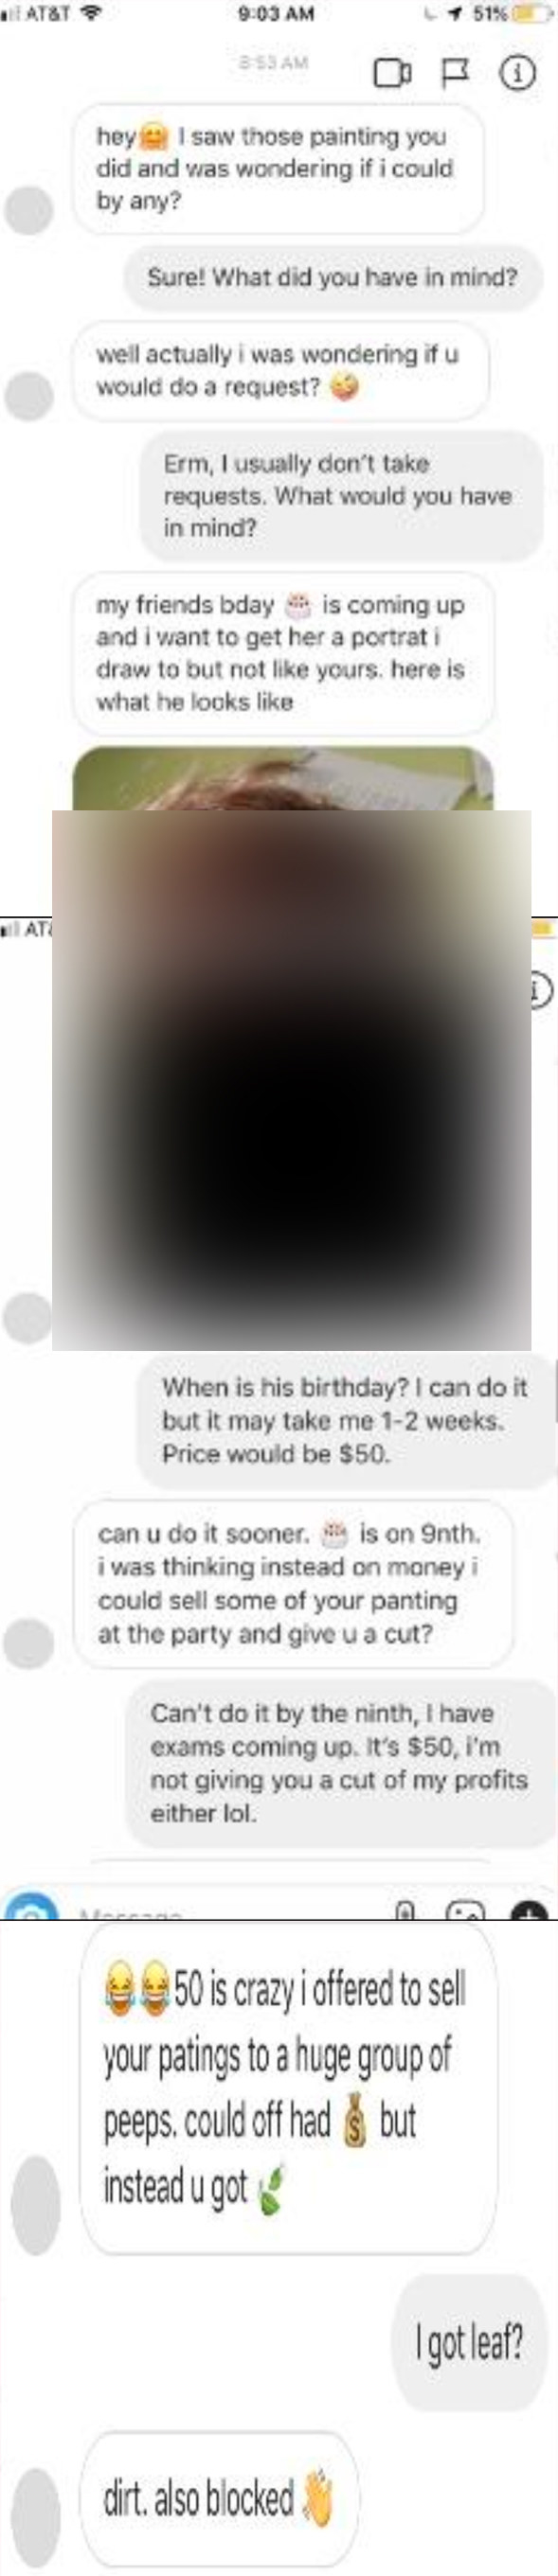 Person needs a rush job on a painting of someone for a birthday party and offers to give the person a cut of the profits from the paintings sold at the party